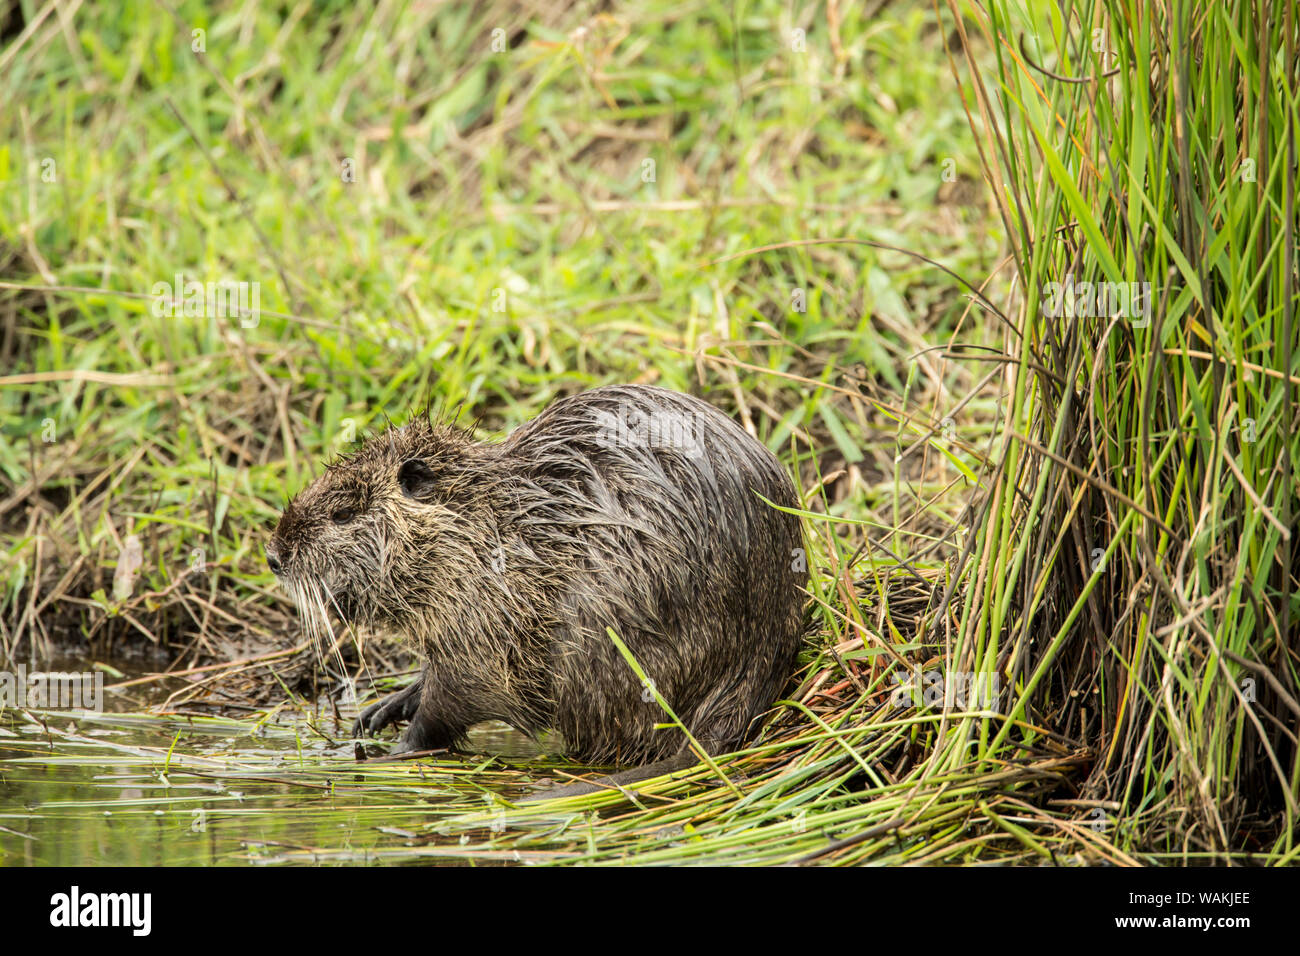 Ridgefield, Washington State, USA. Nutria in Ridgefield National Wildlife Refuge. Coypu, also known as the river rat or nutria, is a large, omnivorous, semi-aquatic rodent. Stock Photo